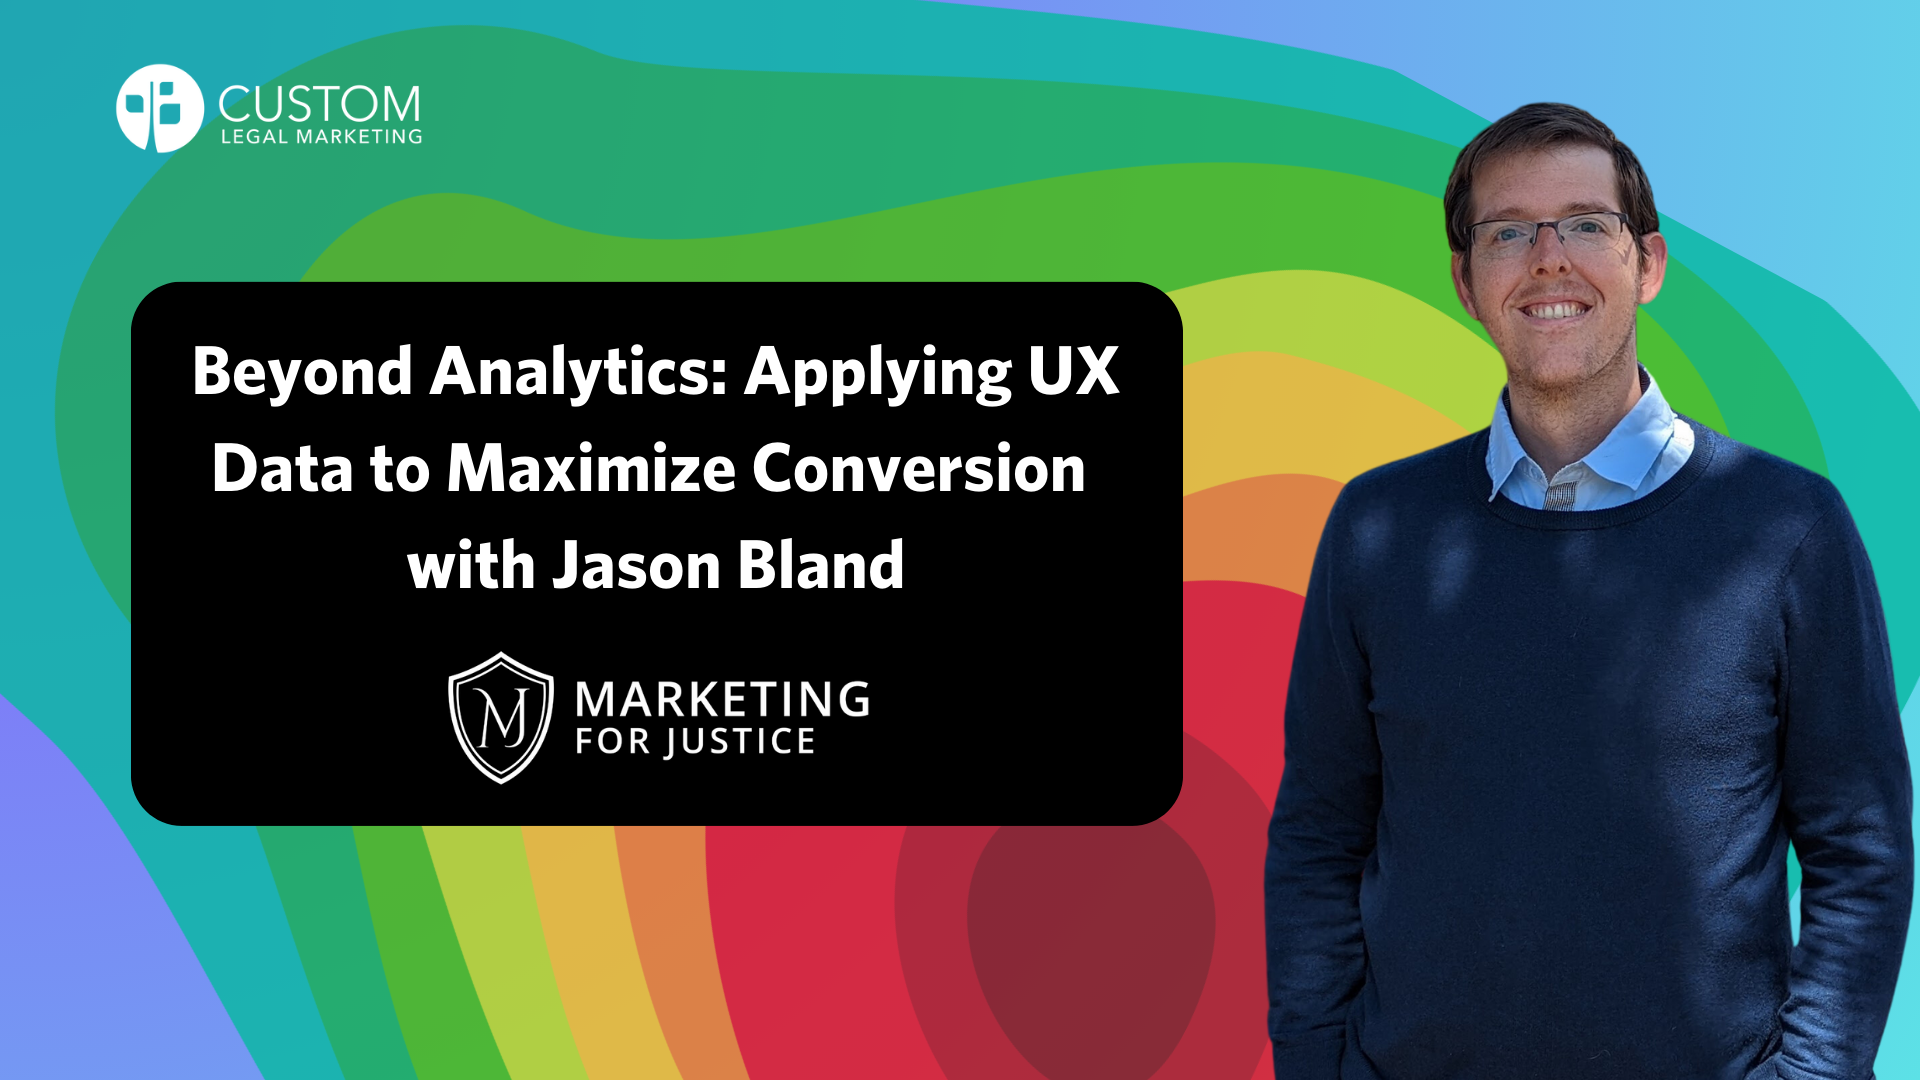 Free Workshop This Week on User Experience Optimization for More Conversions